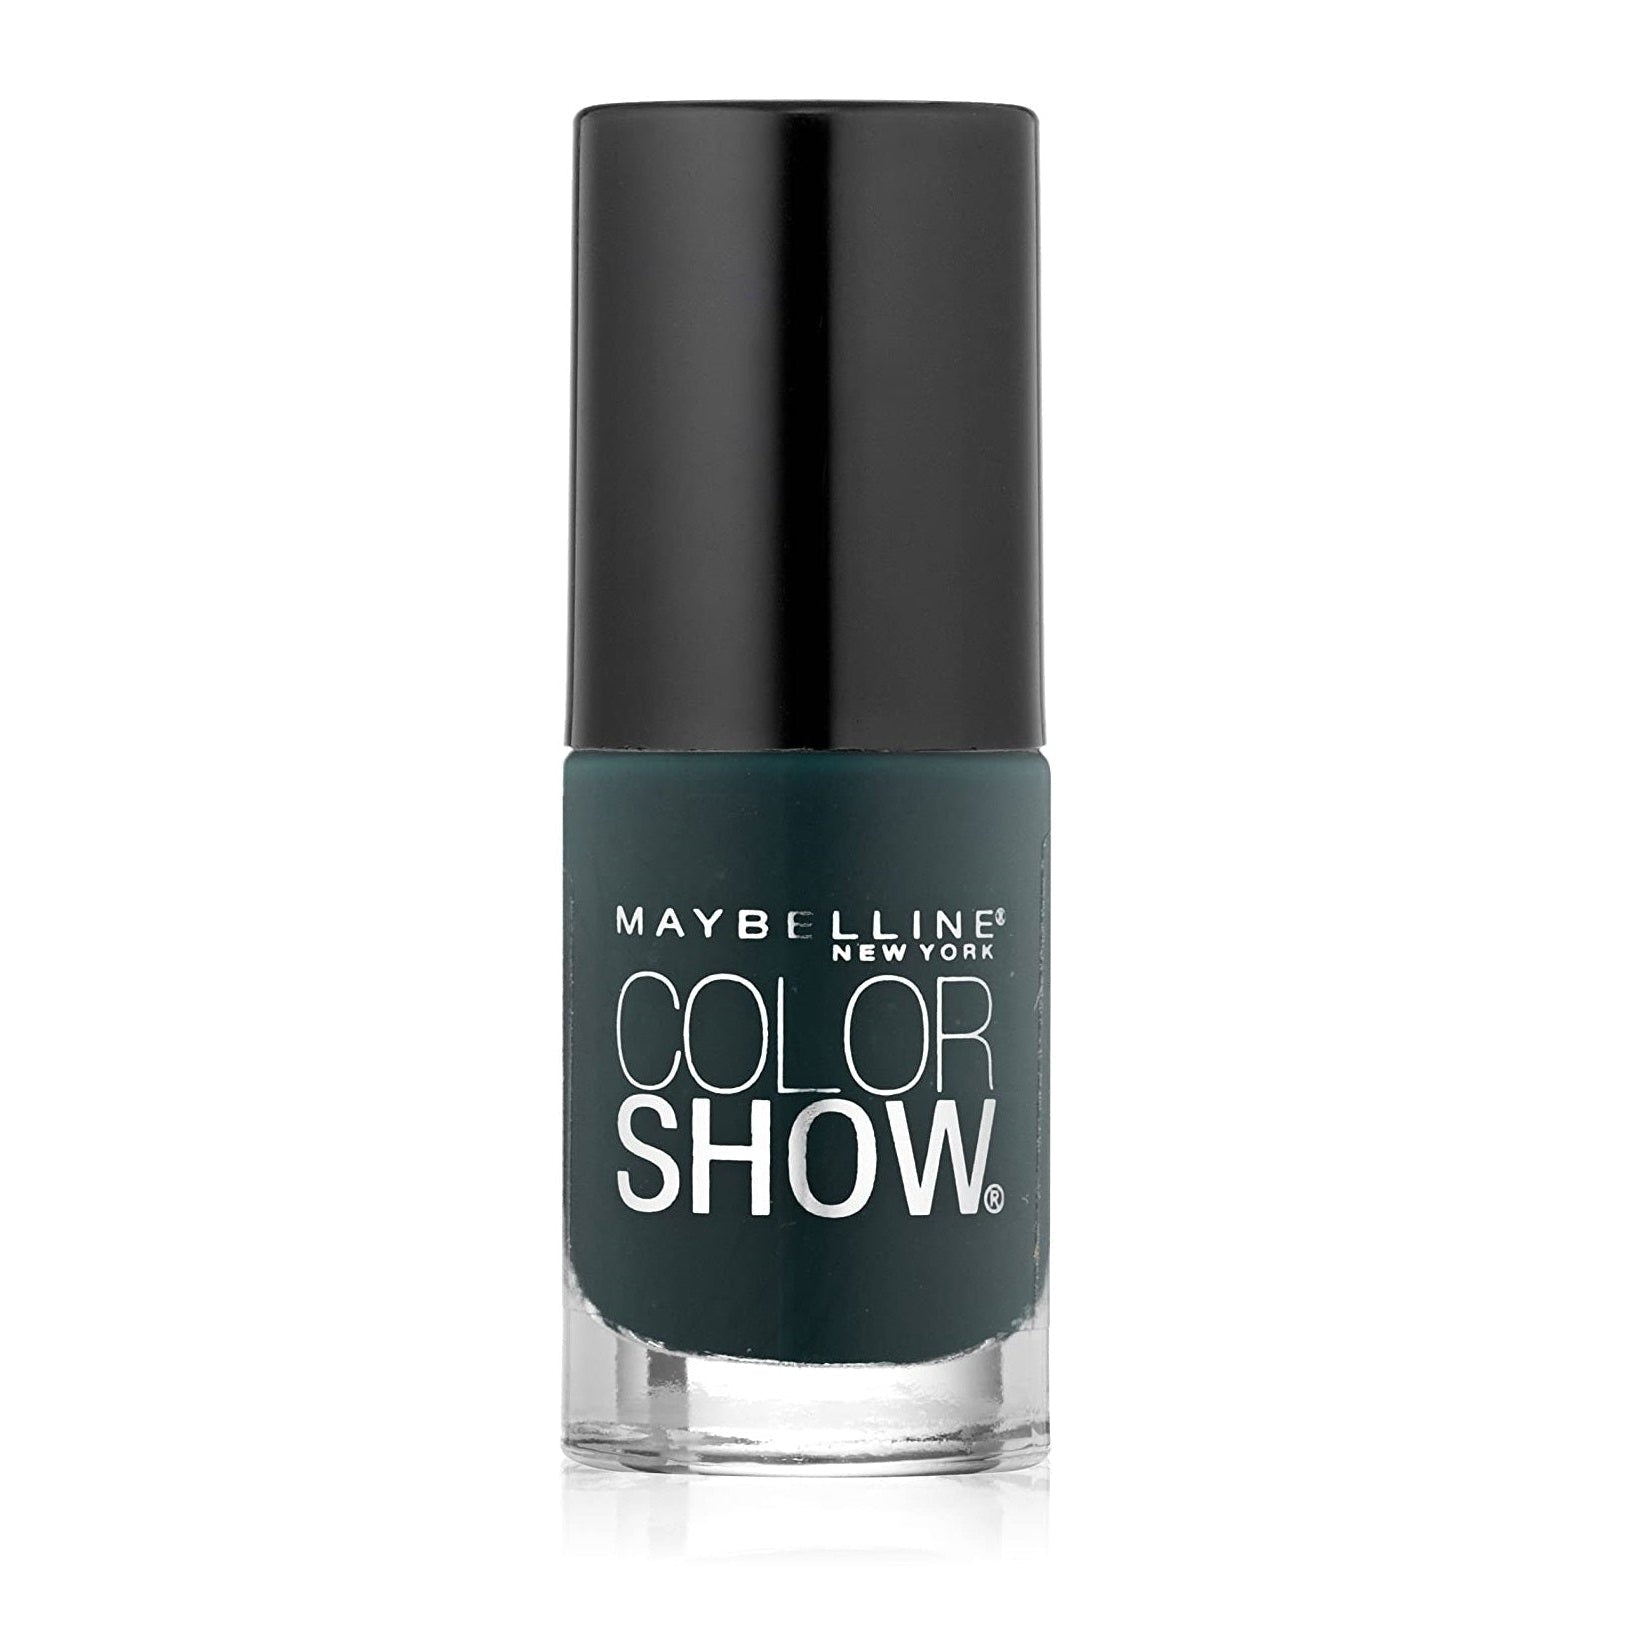 Review of Maybelline Color Show nail polish in 549 Midnight Taupe | Nail  polish, Brown nail polish, Maybelline nail polish